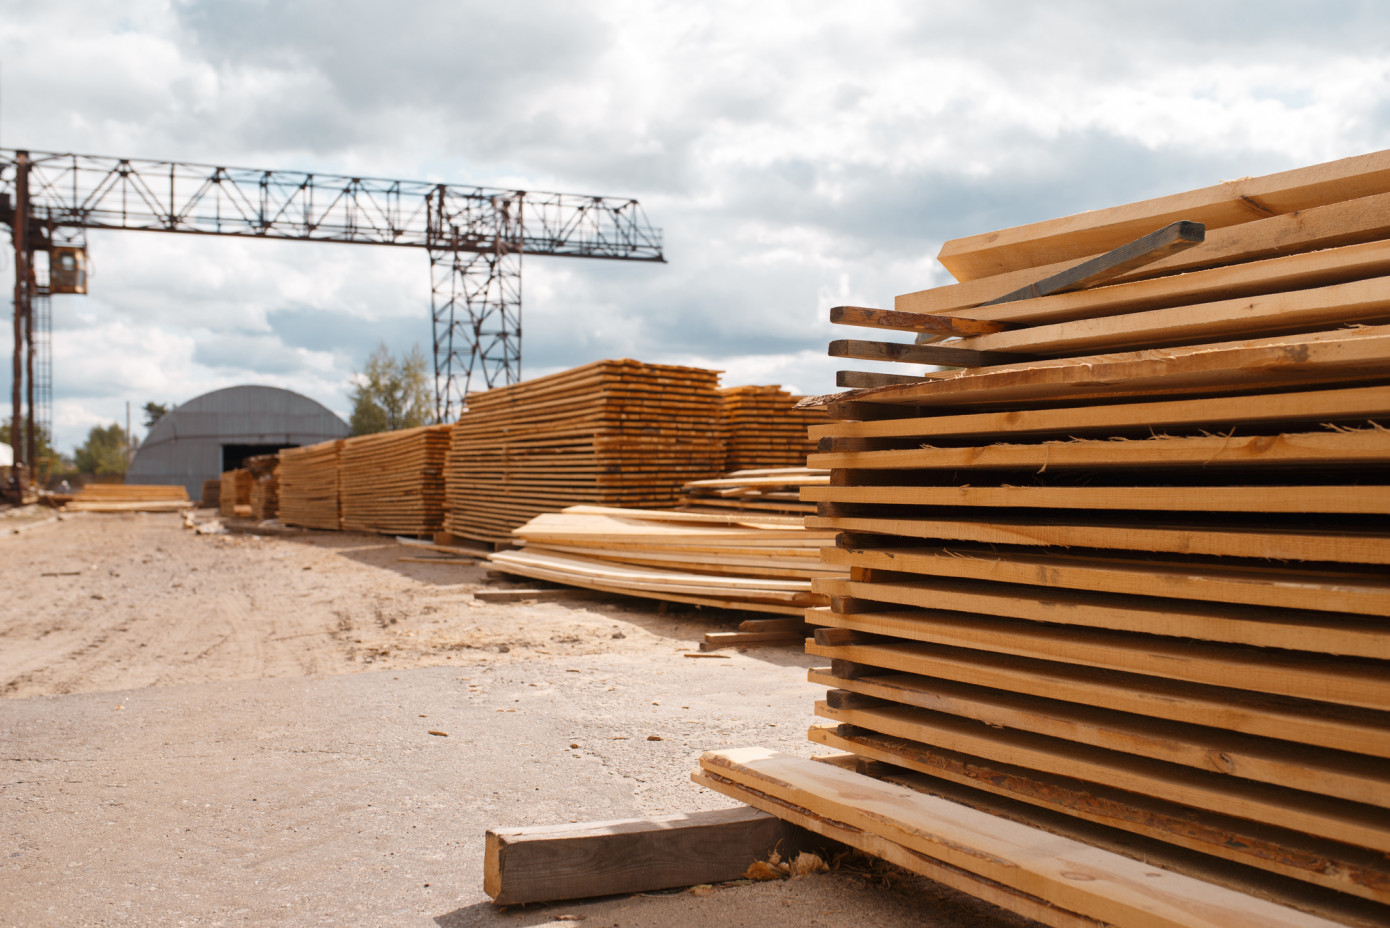 In October, price for lumber exported from Thailand dips 1.5%